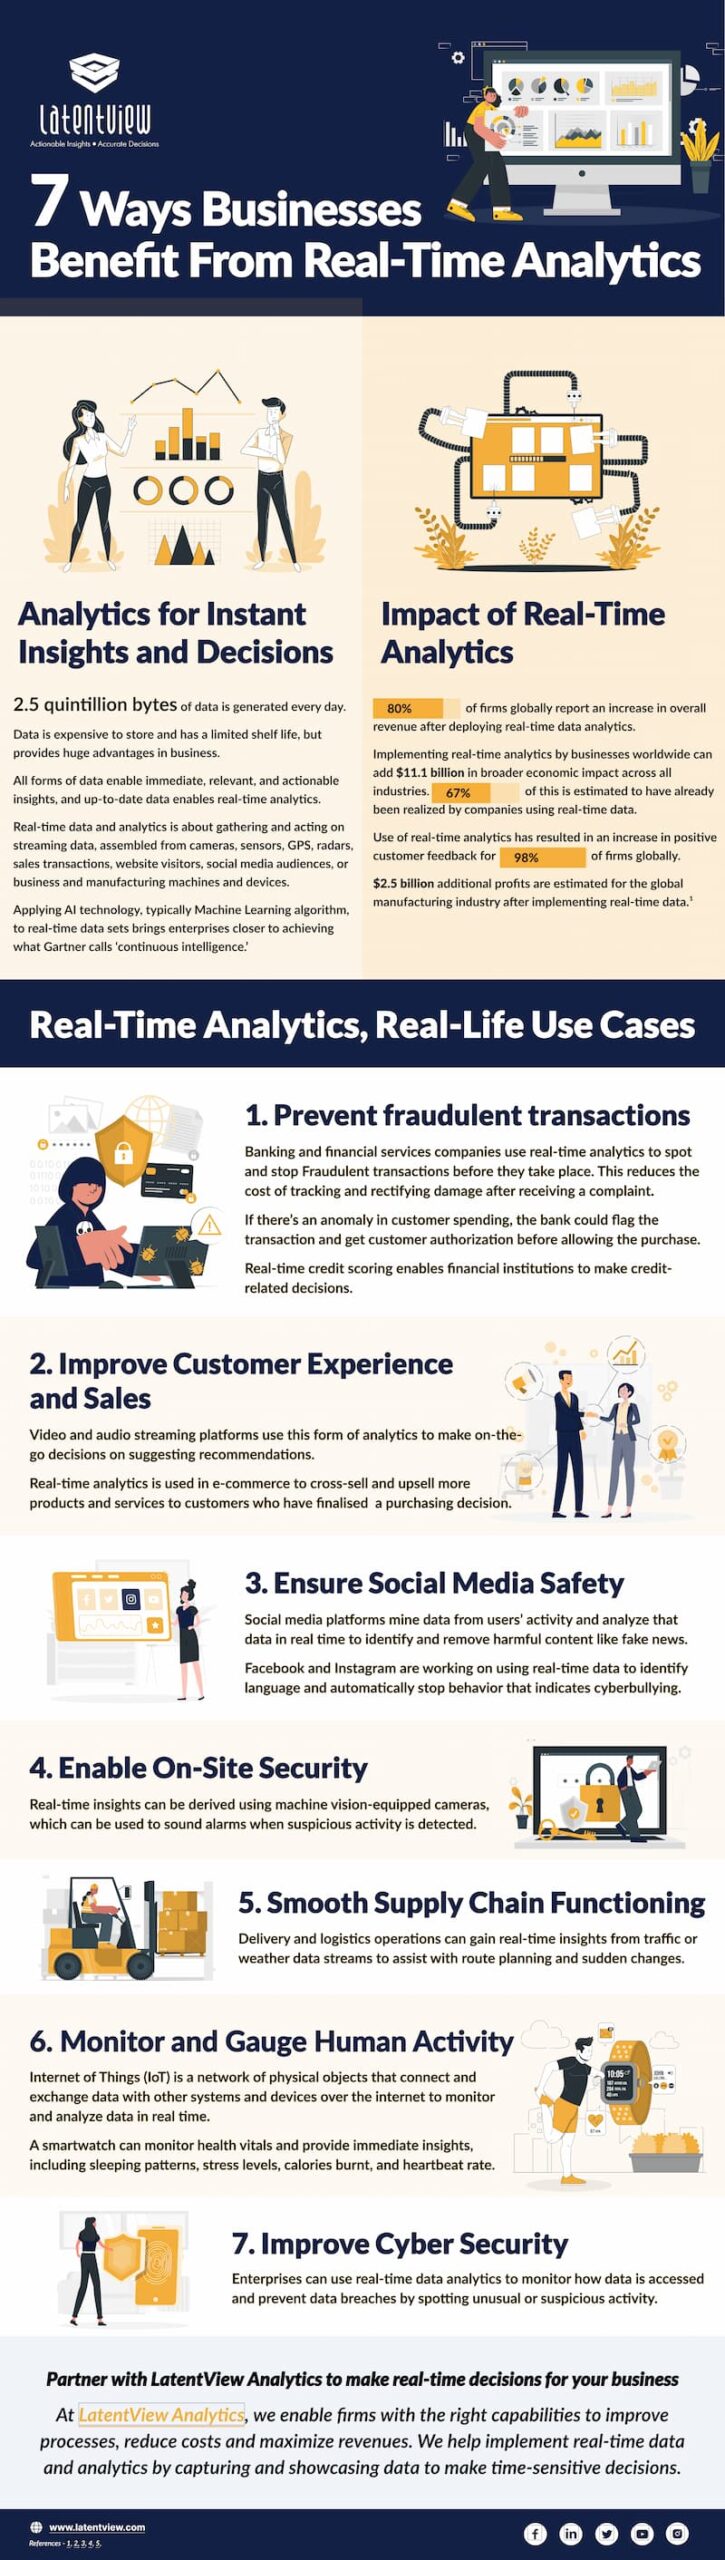 7 Ways Businesses Benefit From Real-Time Analytics